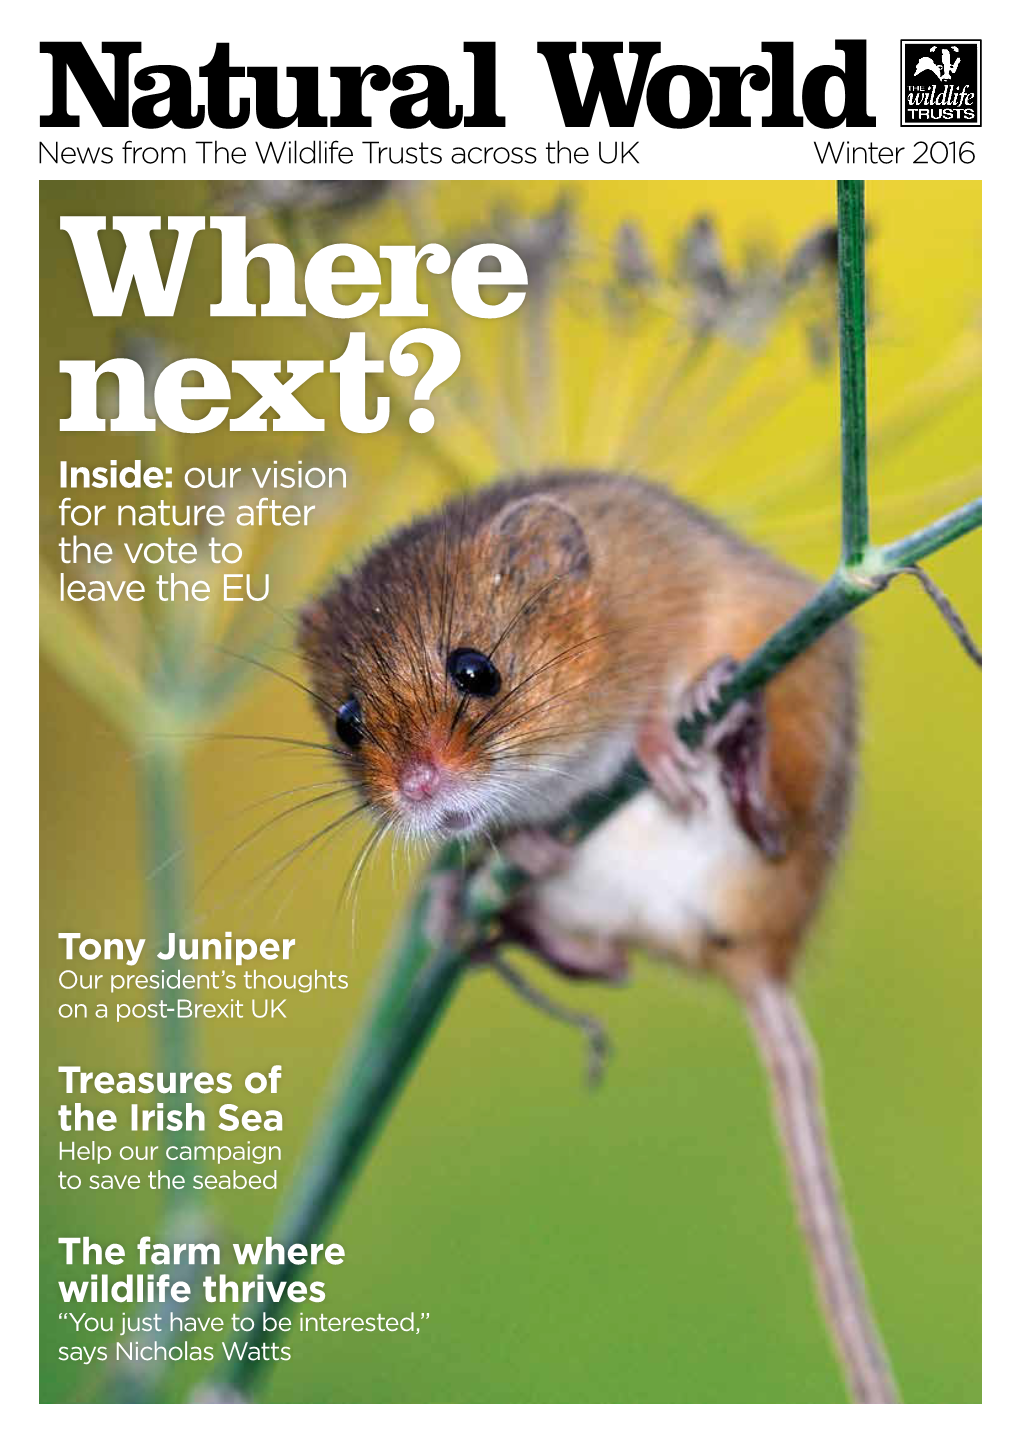 Inside: Our Vision for Nature After the Vote to Leave the EU Tony Juniper Treasures of the Irish Sea the Farm Where Wildlife